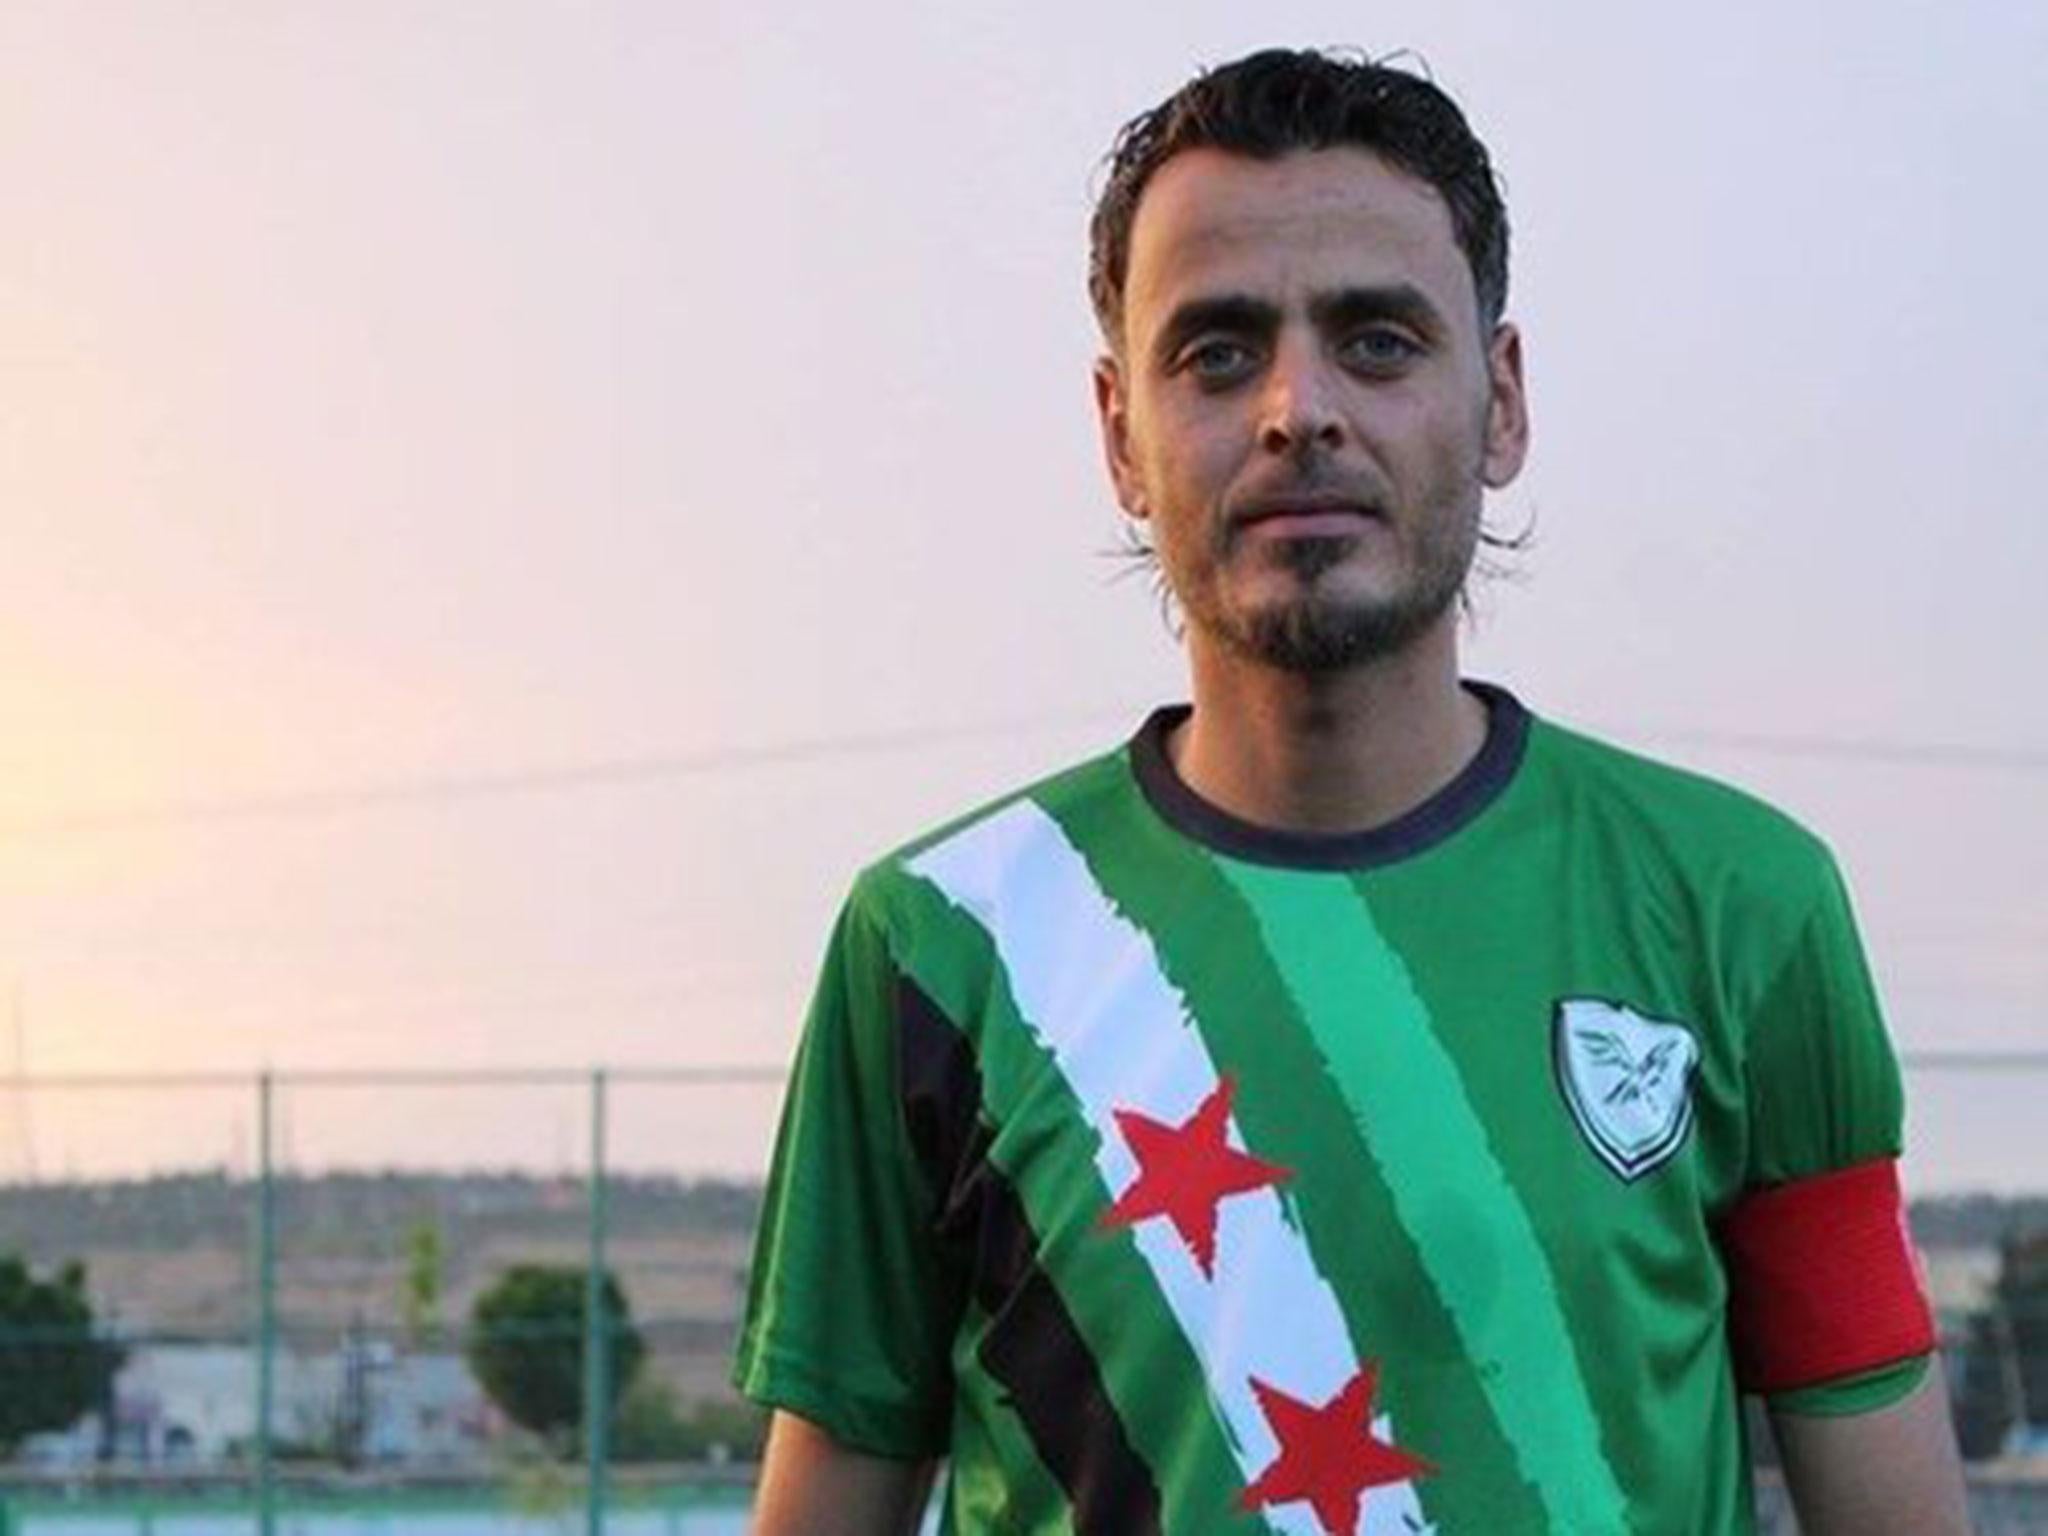 With his previous club – Al-Taliya of Hama – Firas won the Syrian Cup twice and reached the quarter-finals of the Asian Football Confederation Cup (AFC), Asia’s version of the Europa League. Now, he lives a very different life